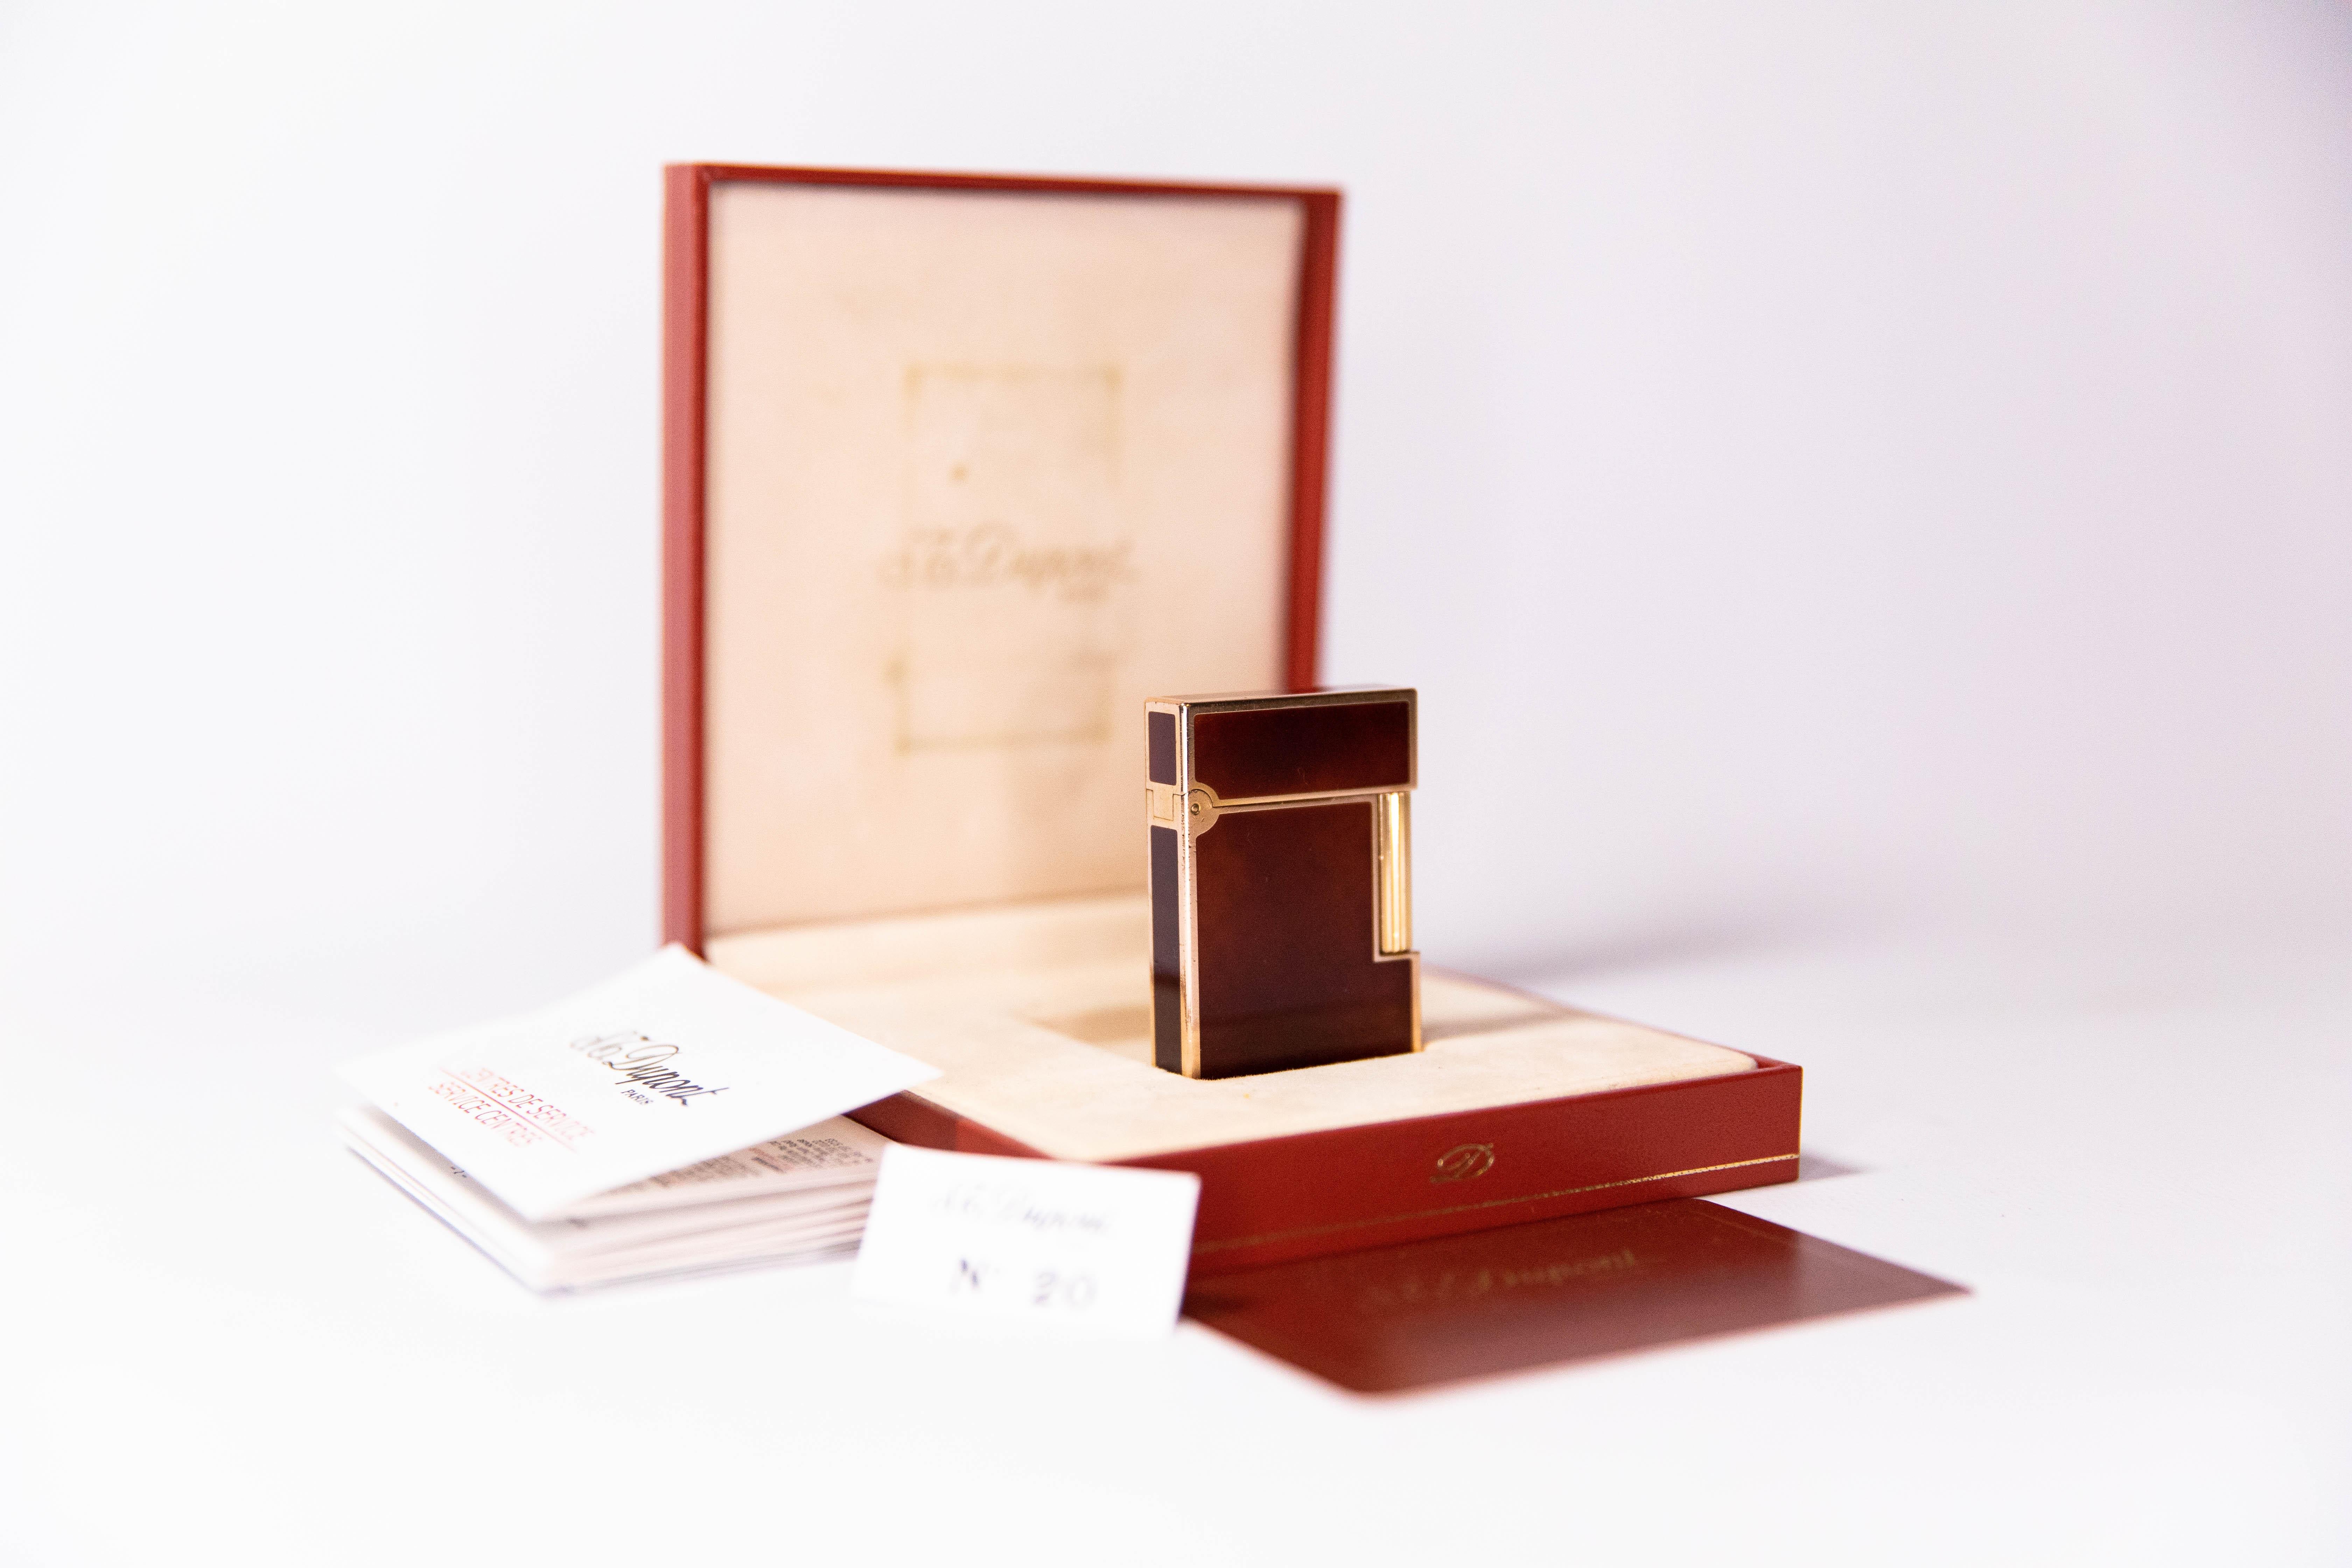 Vintage Authentic Rose Gold plated Linge 2 ST Dupont Lighter in Red Lacquer 1990s Full Set

The iconic S.T. Dupont name is known for quality, well-made cigarette lighters and other luxury implements. The company’s origin can be traced to Simon